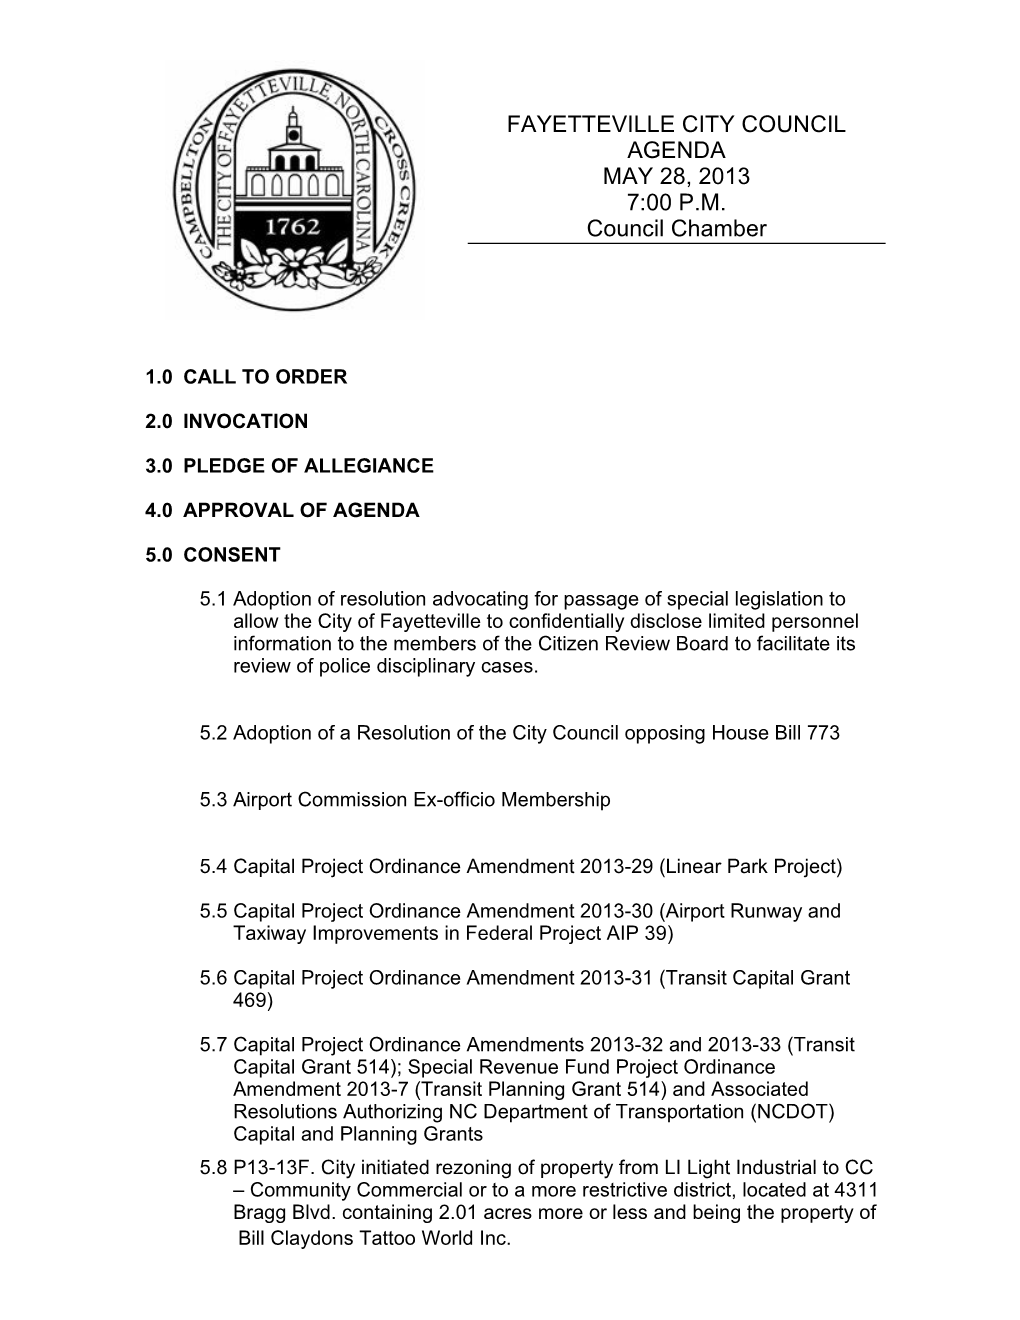 Fayetteville City Council Agenda May 28, 2013 7:00 P.M